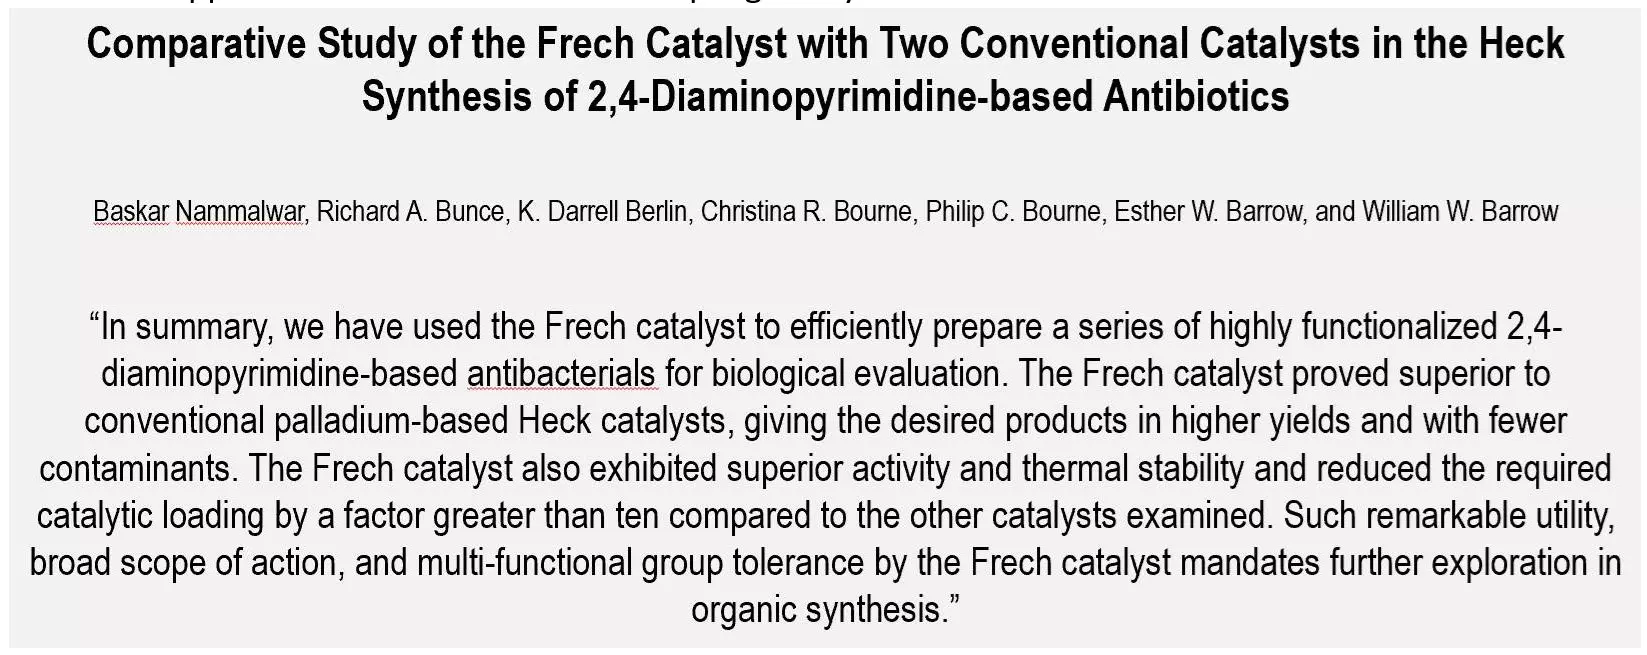 Comperative Study of the Frech Catalyst